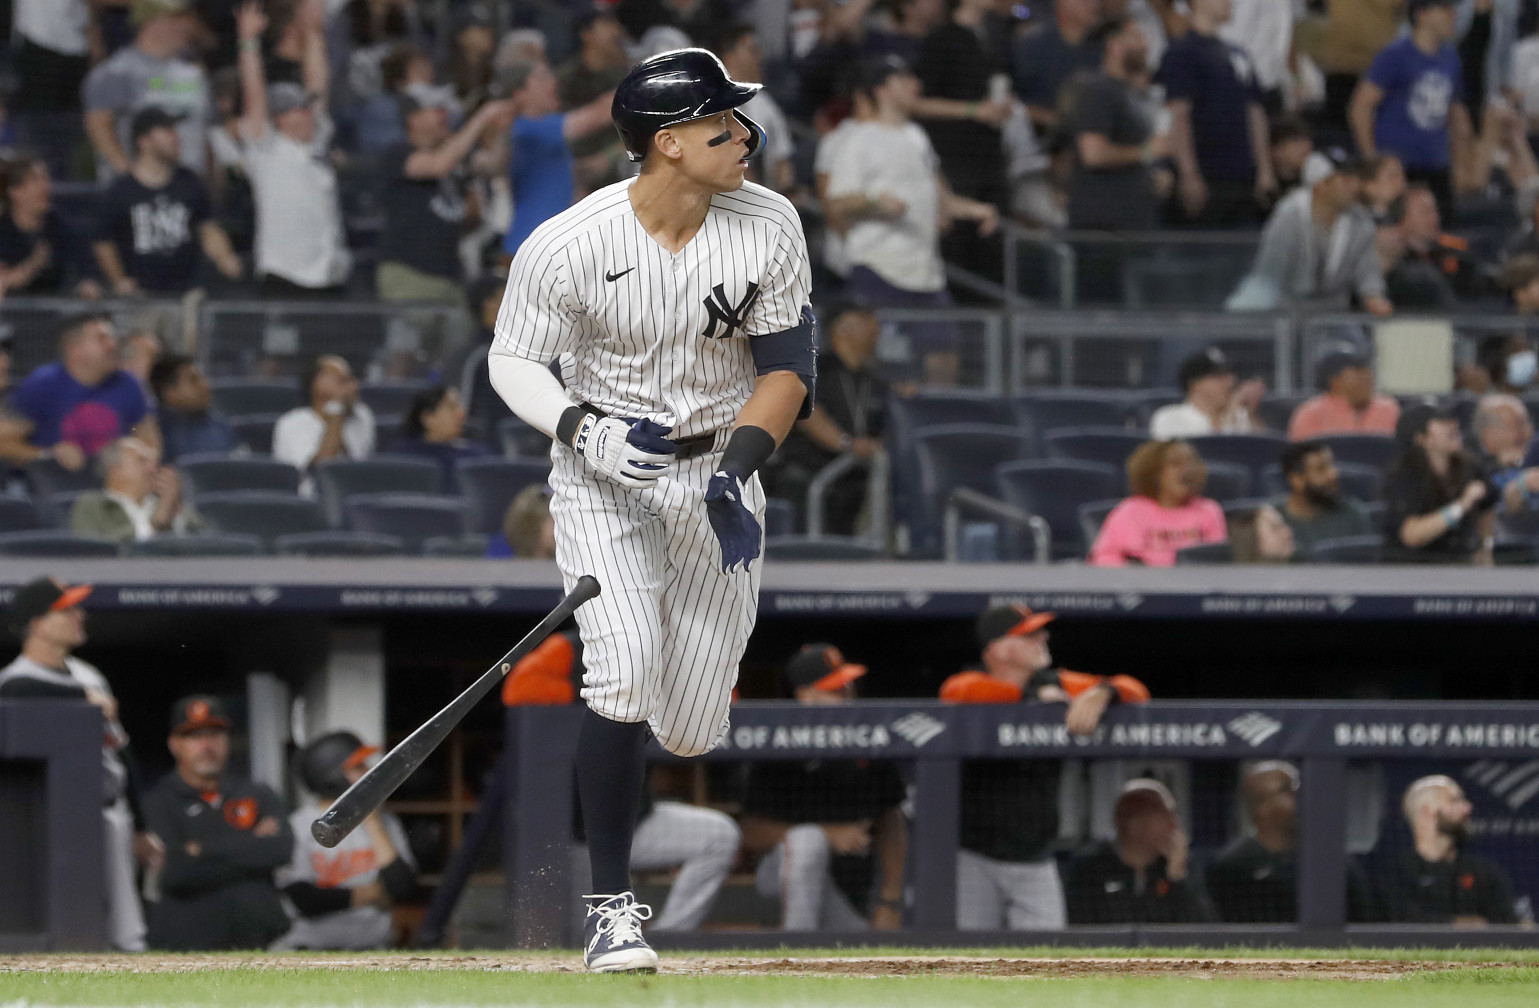 Yankees' Aaron Judge on fire, yet 'still searching'; Joey Gallo is